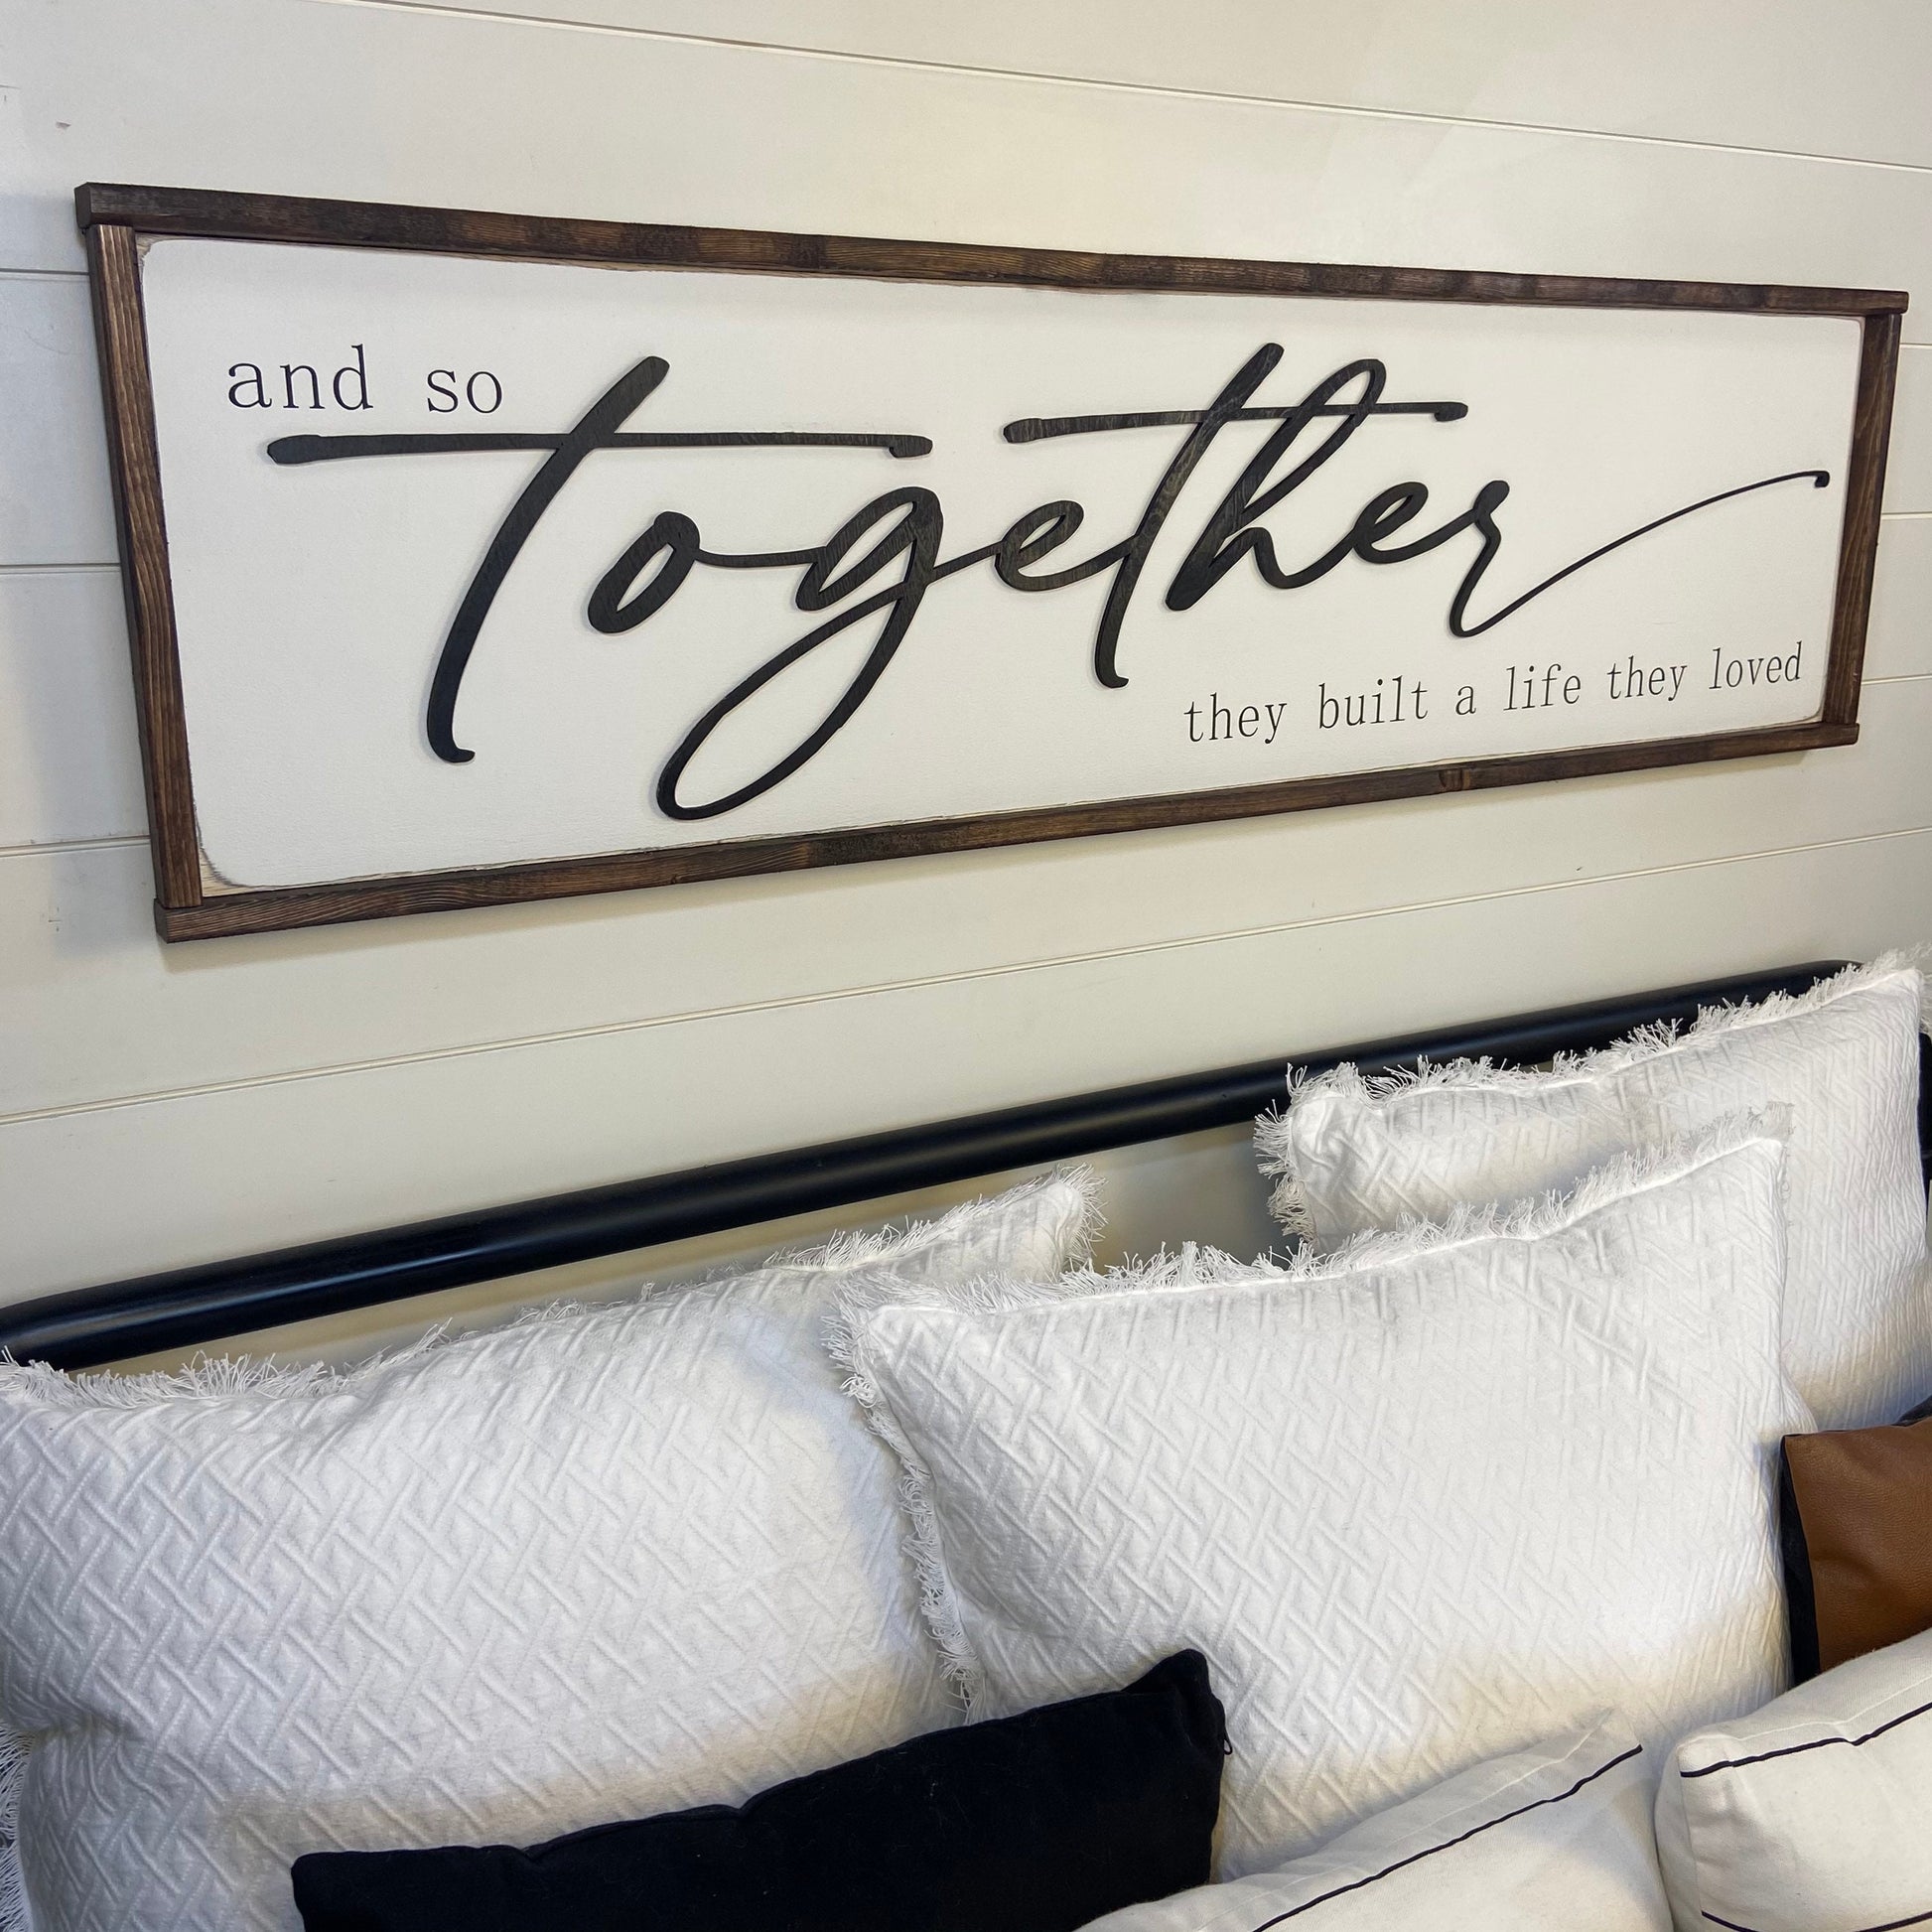 and so together they built a life they loved [FREE SHIPPING!]